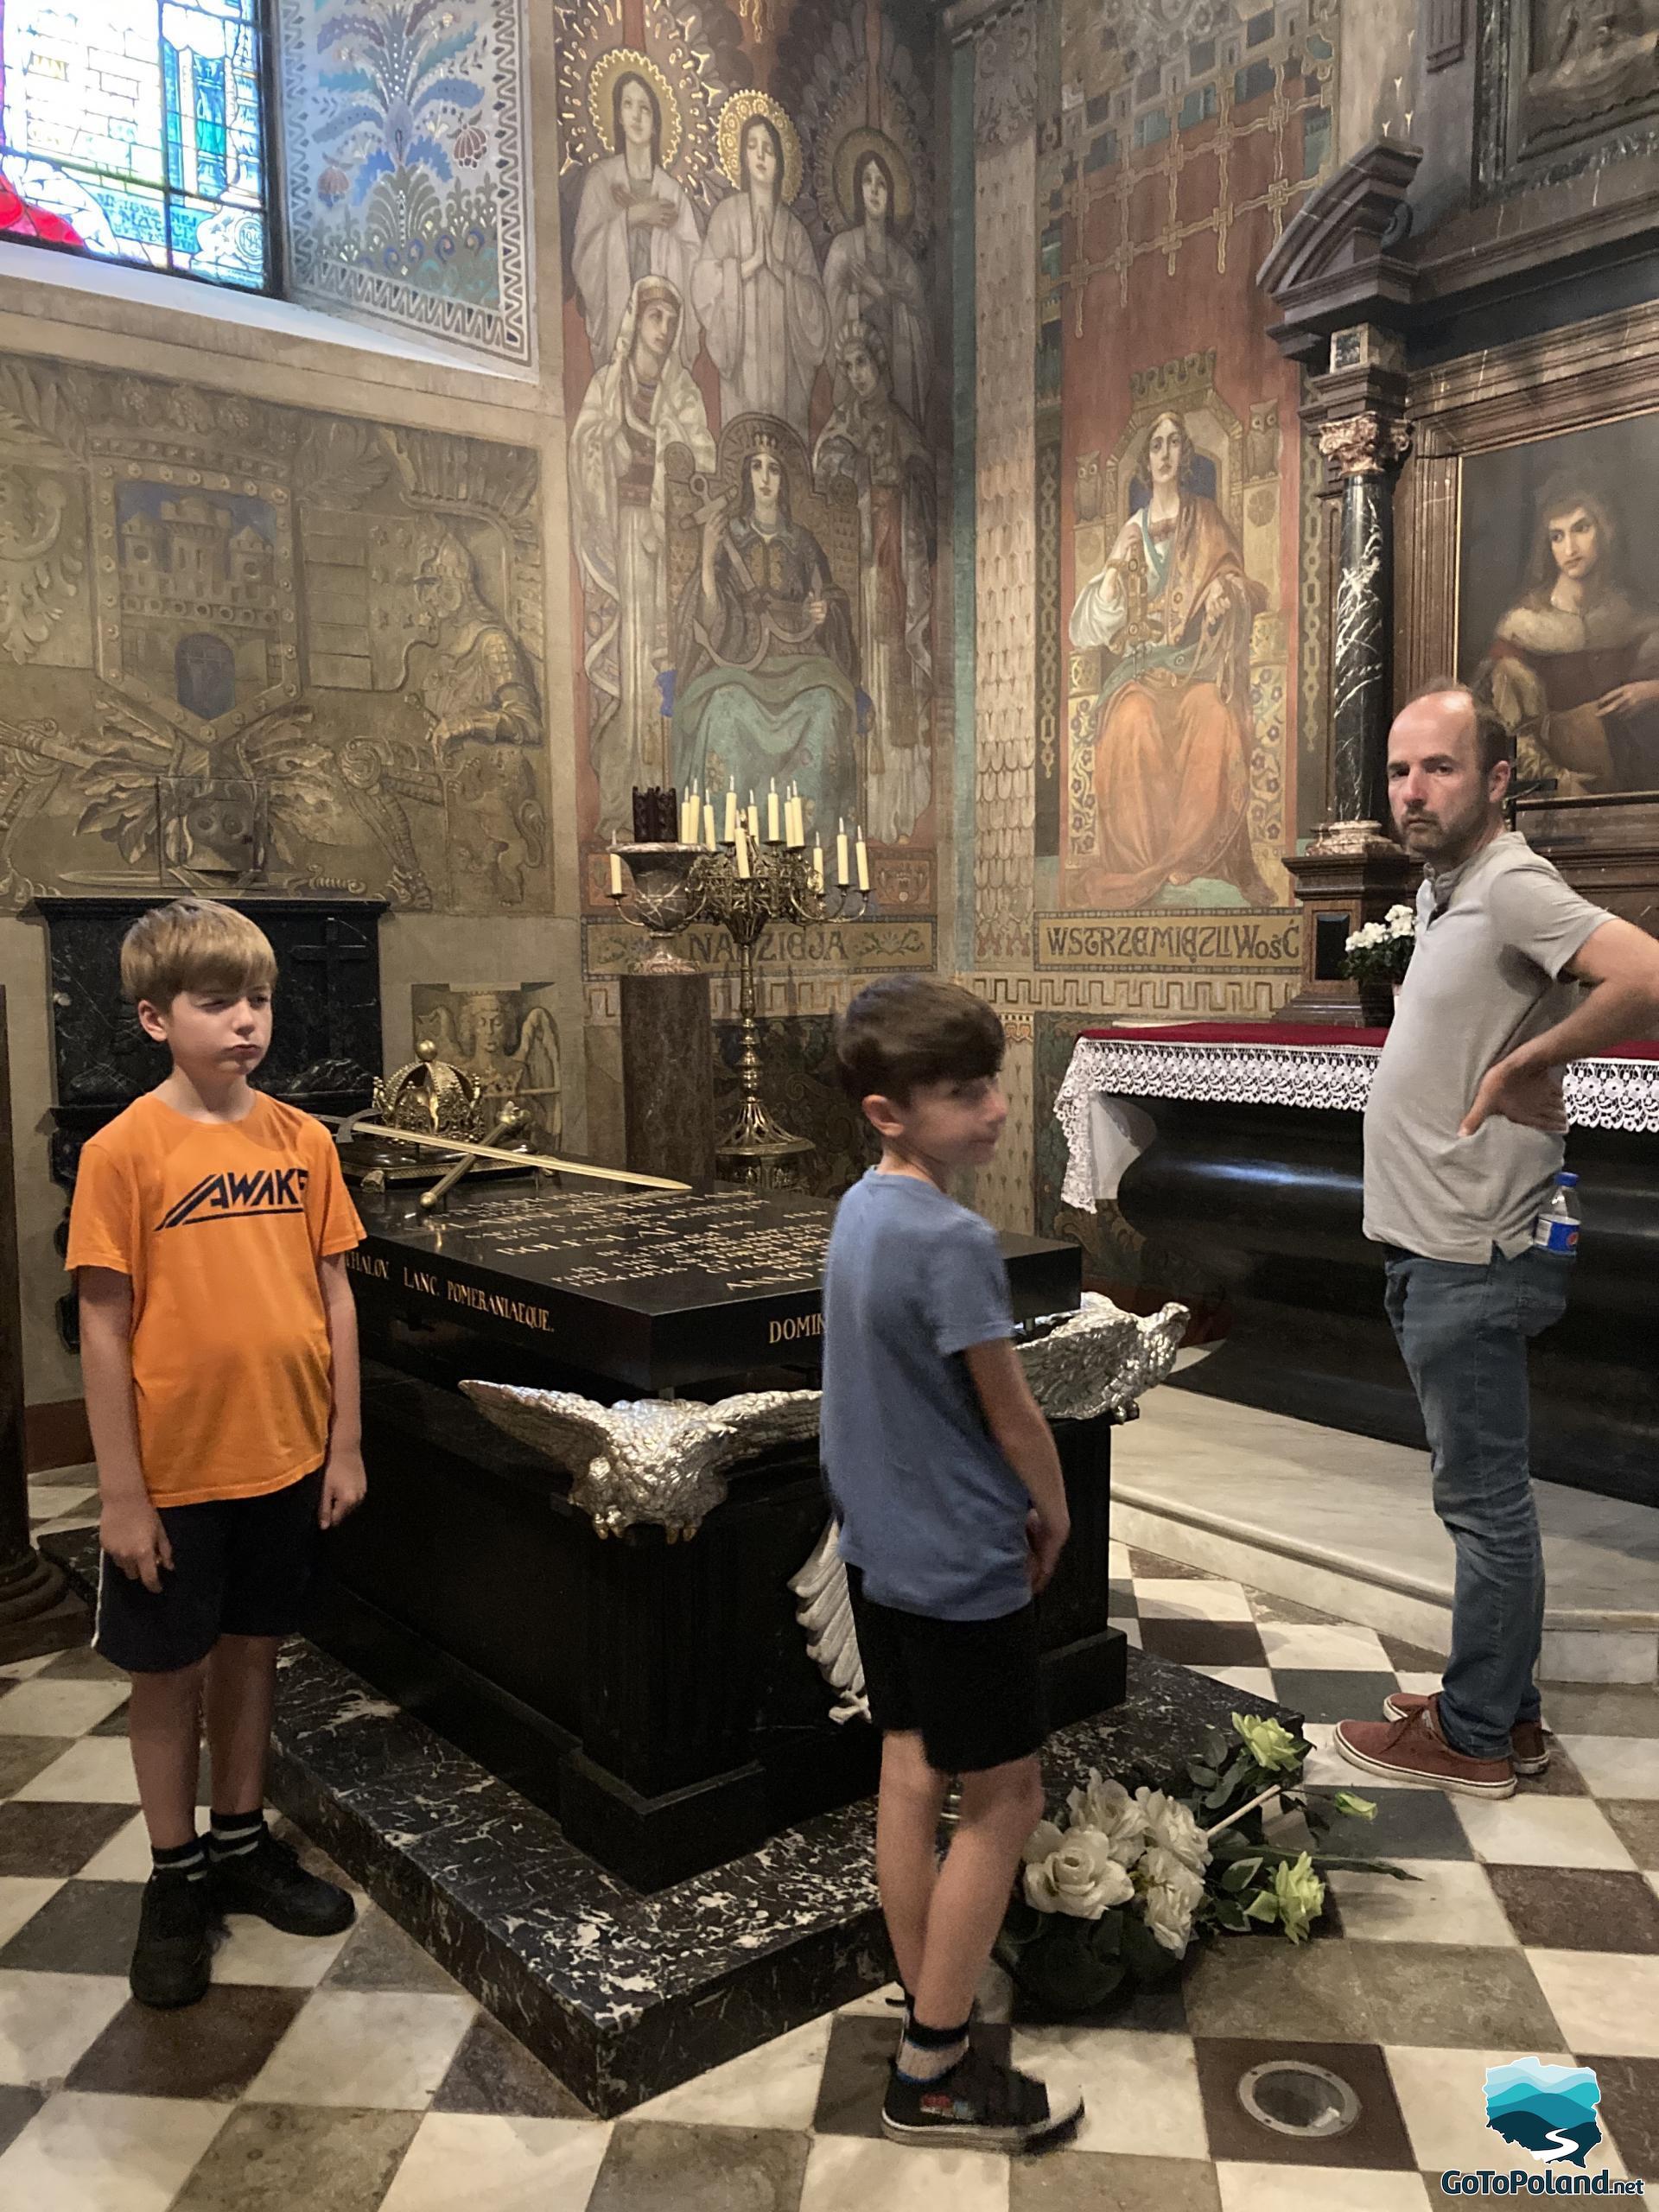 A man and two young boys standing by the tomb of the rulers of medieval Poland. They are in a church